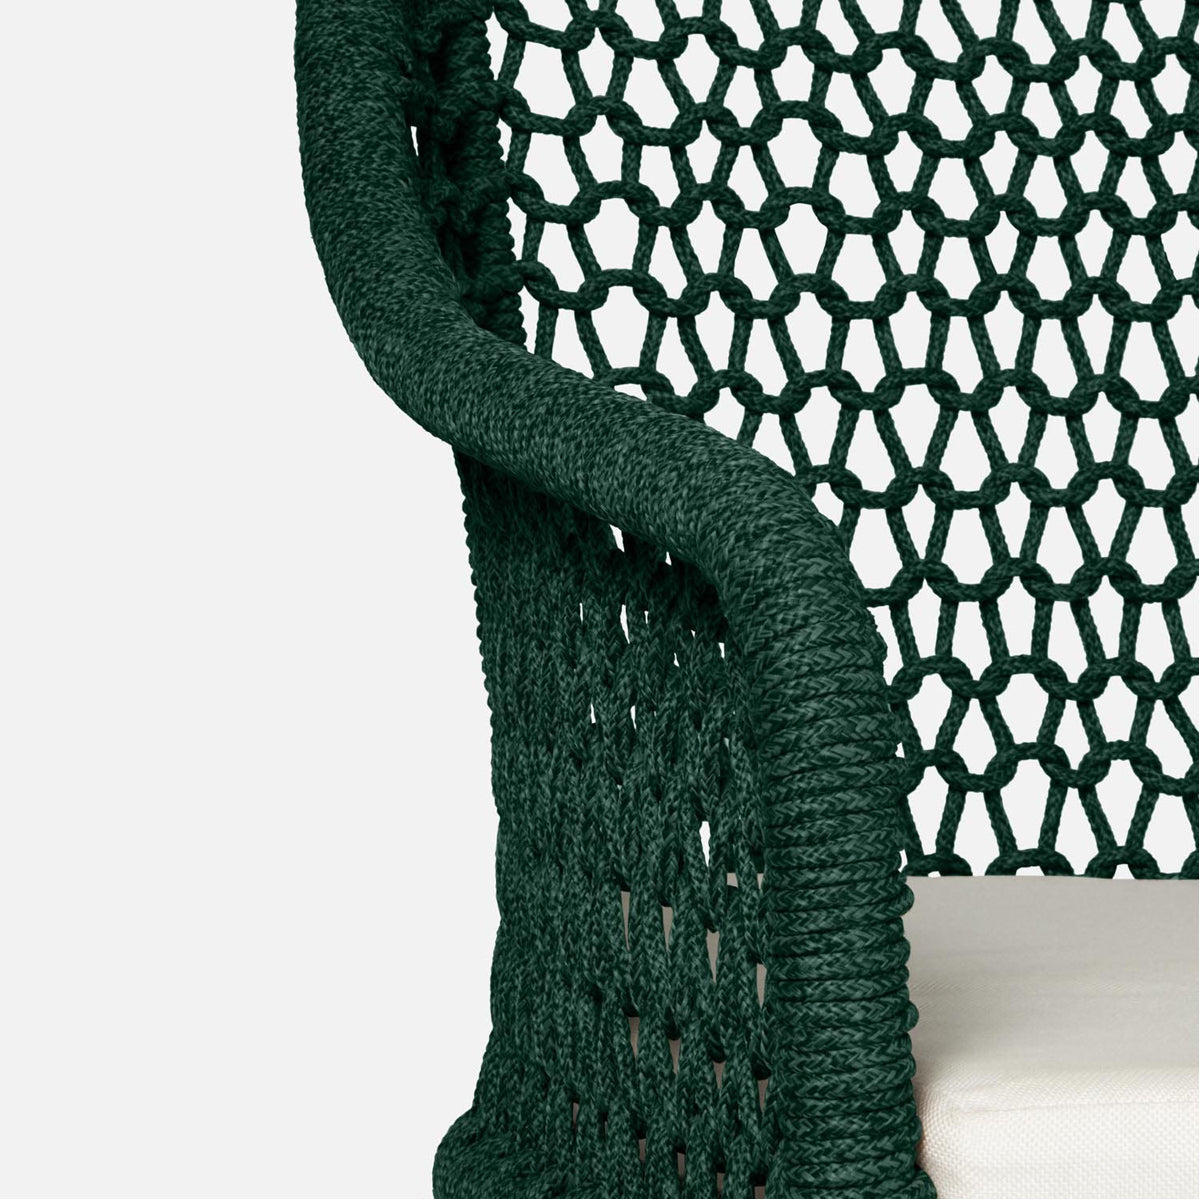 Made Goods Chadwick Woven Rope Outdoor Arm Chair in Clyde Fabric